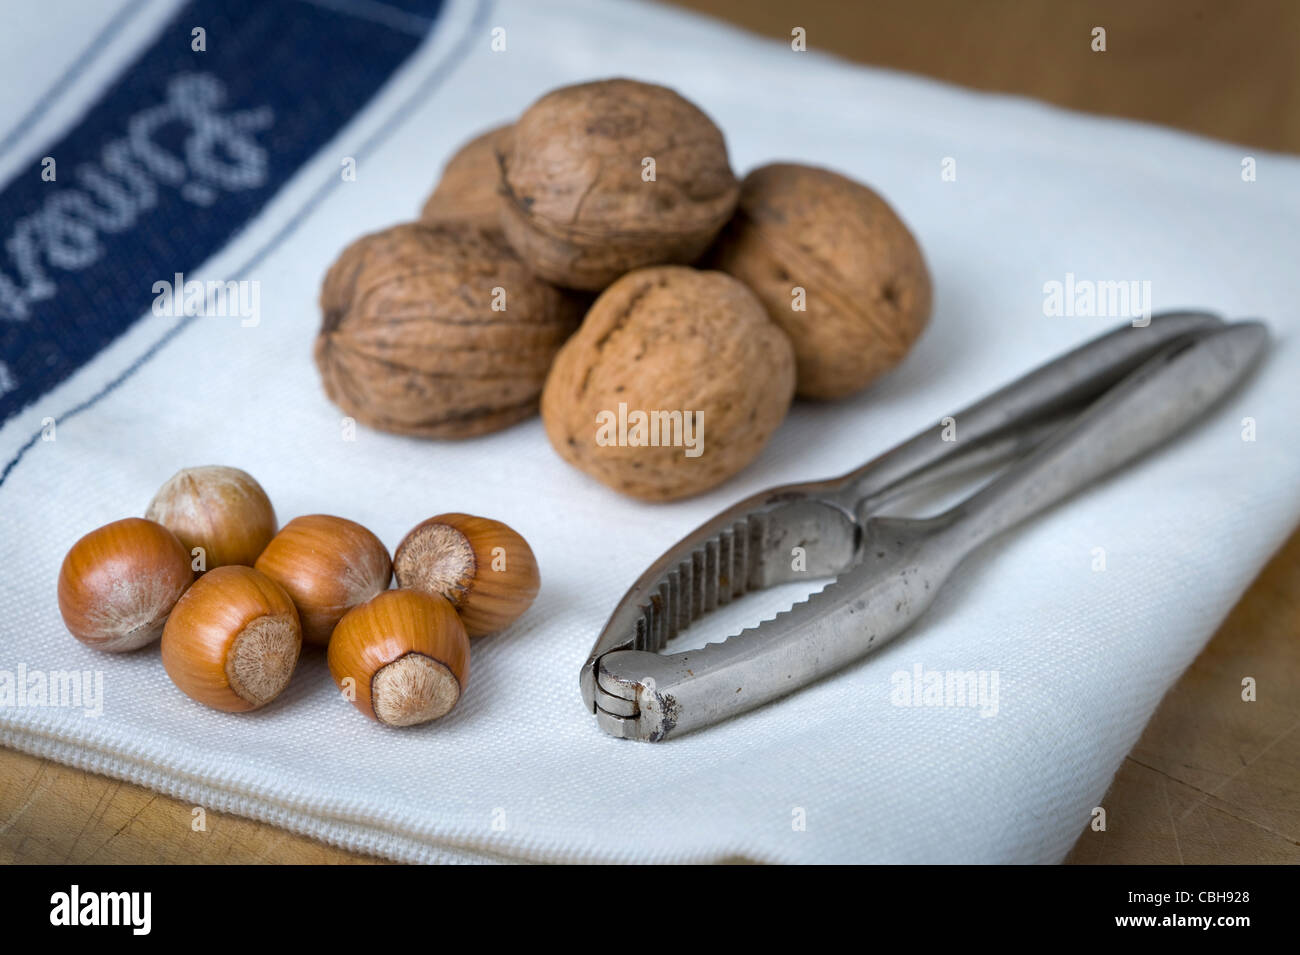 whole walnuts and hazel nuts on a white tea towel with nut crackers Stock Photo